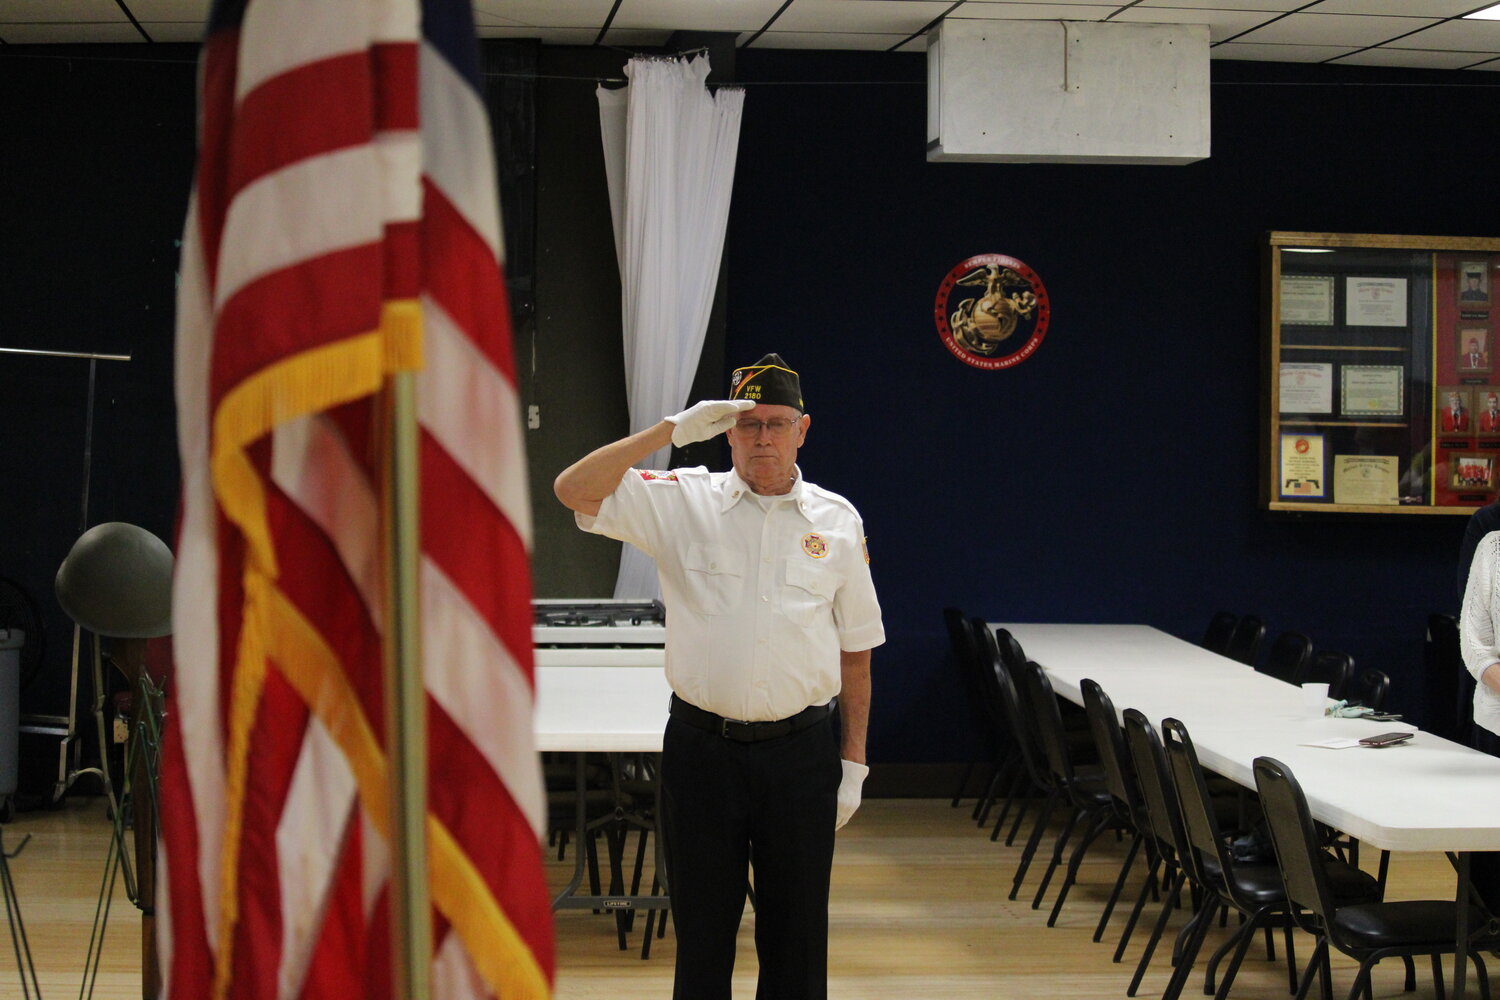 A member of the color guard salutes the American flag while the national anthem is sung.